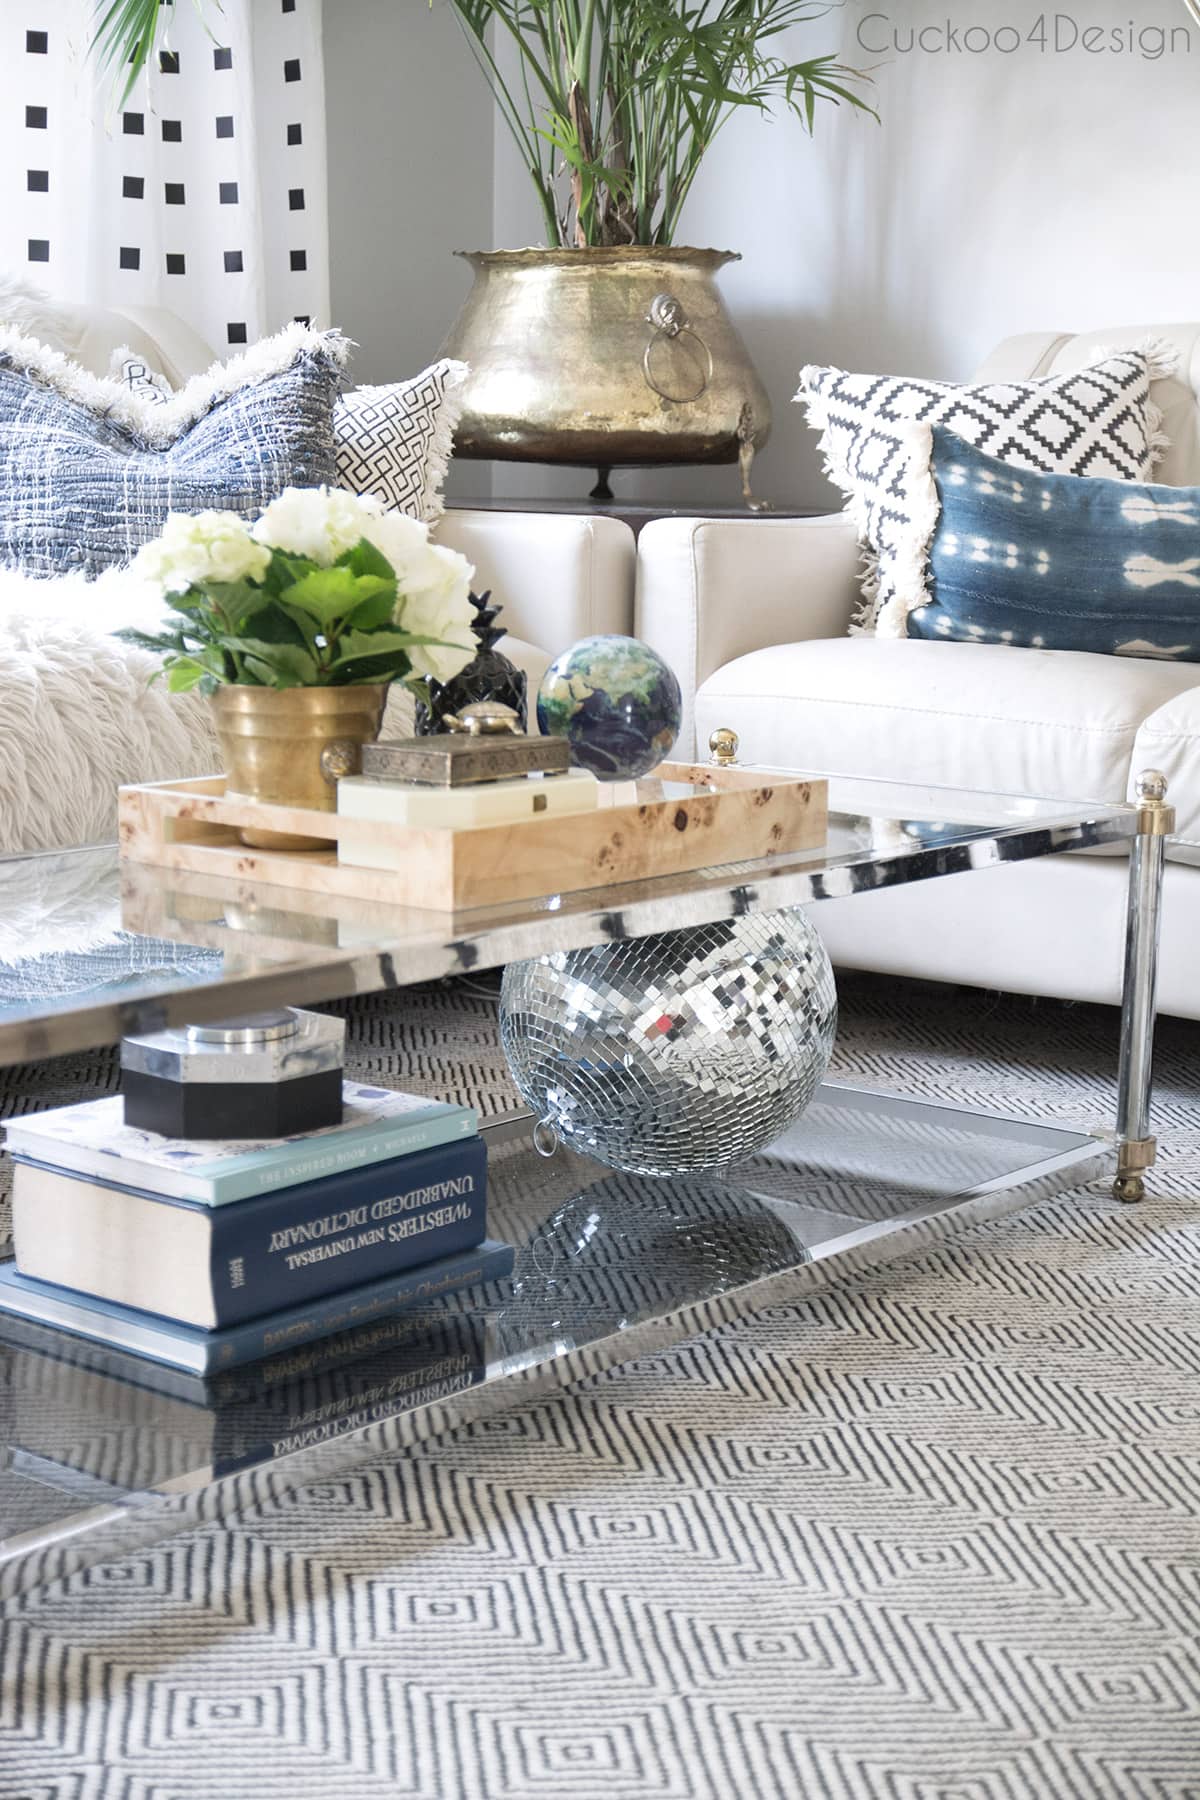 coffee table decorating ideas